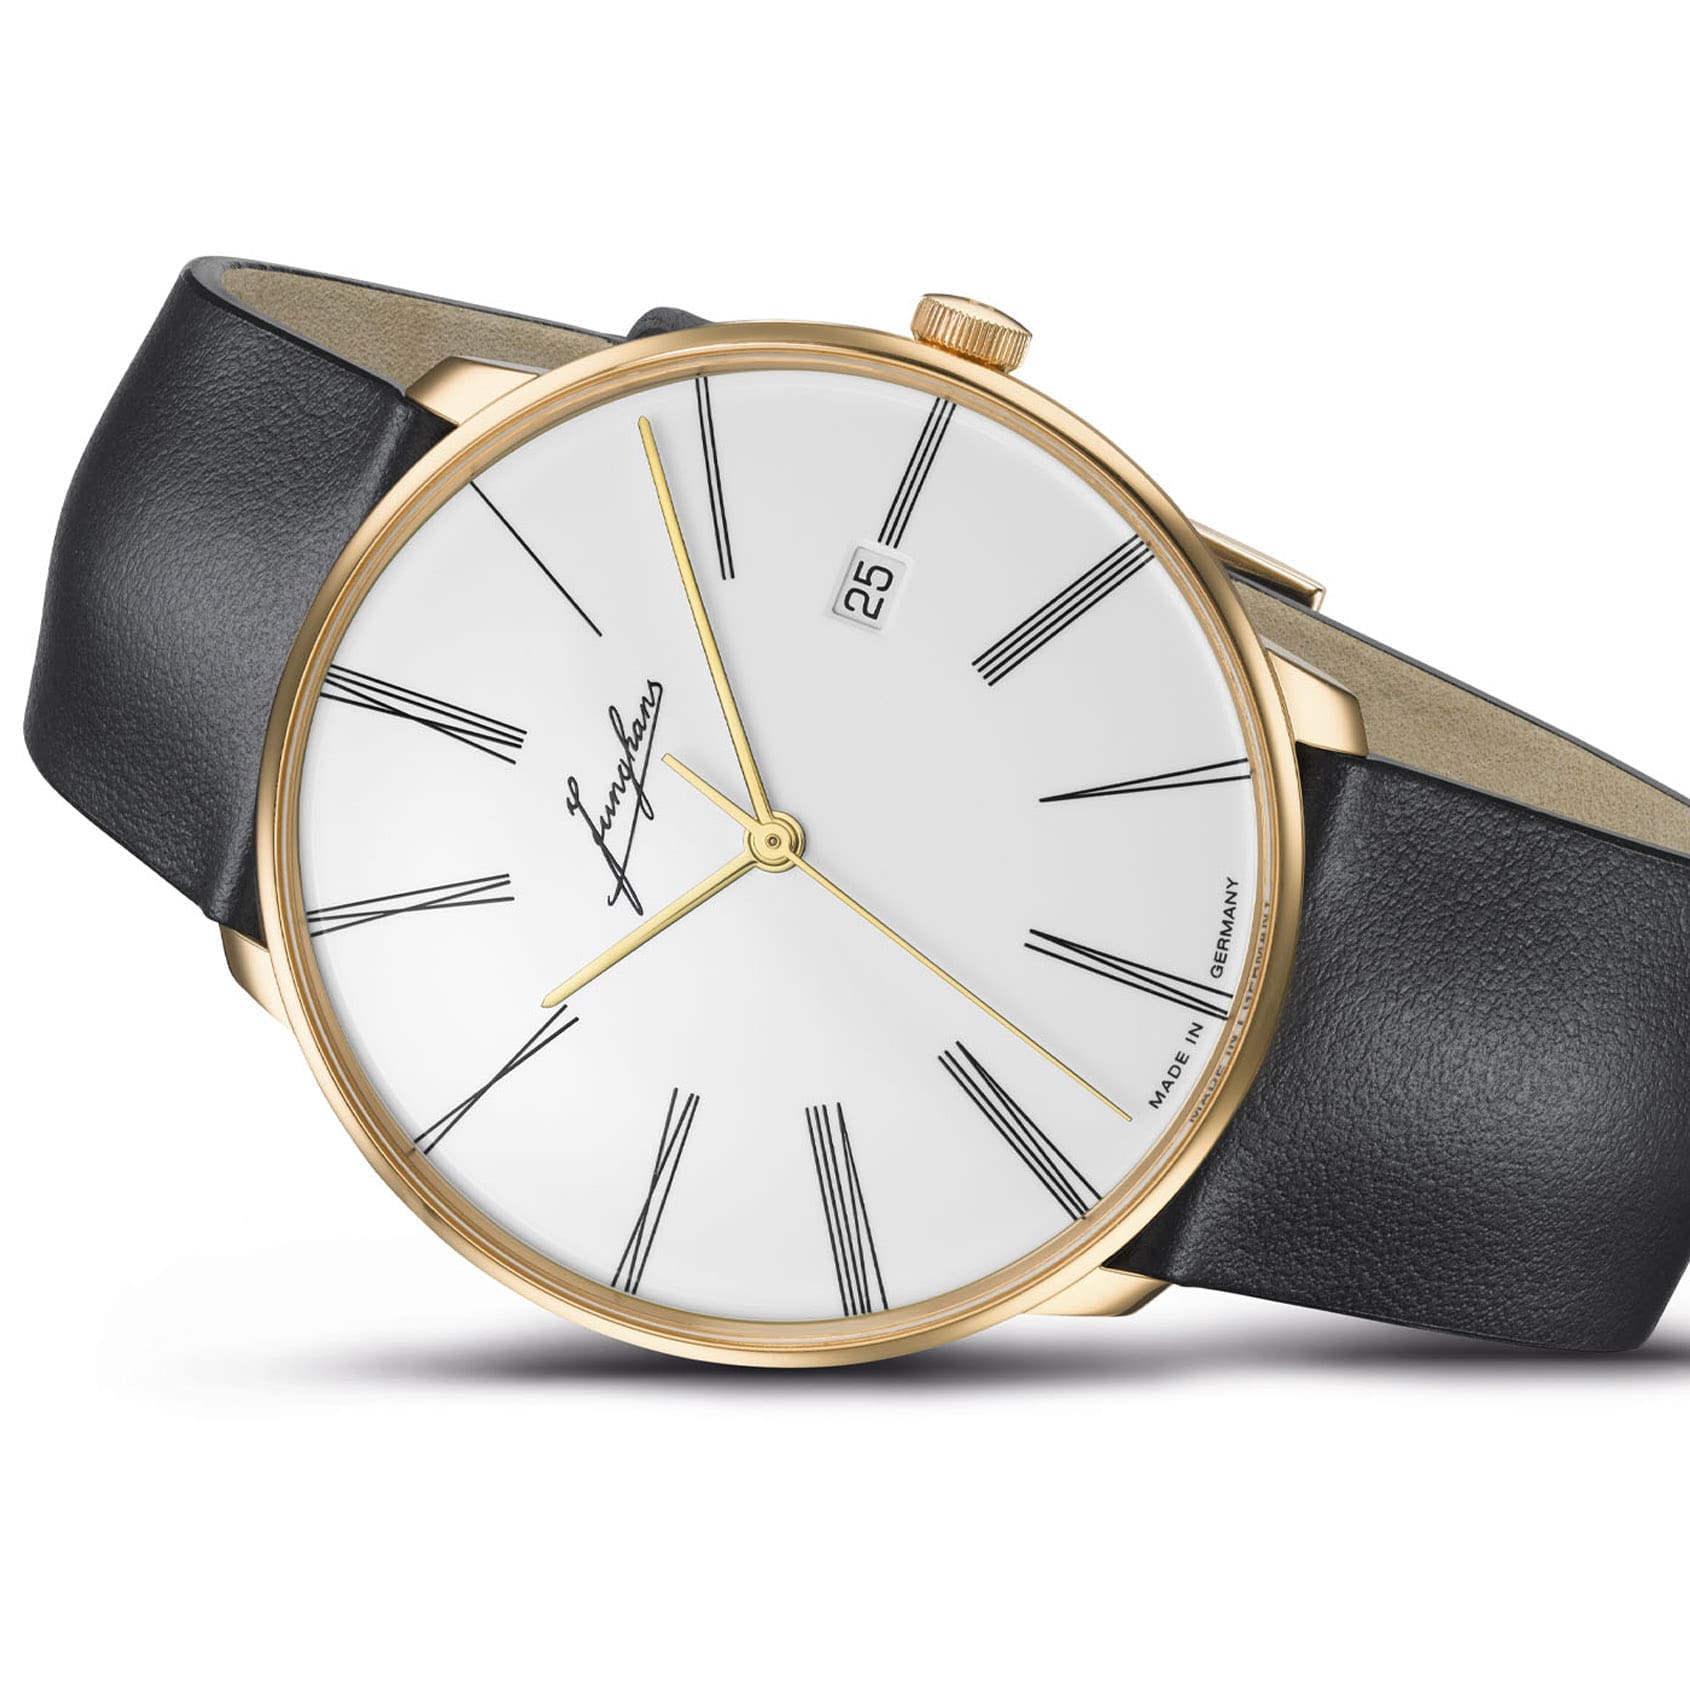 INTRODUCING: The Junghans Meister fein Automatic Edition Erhard